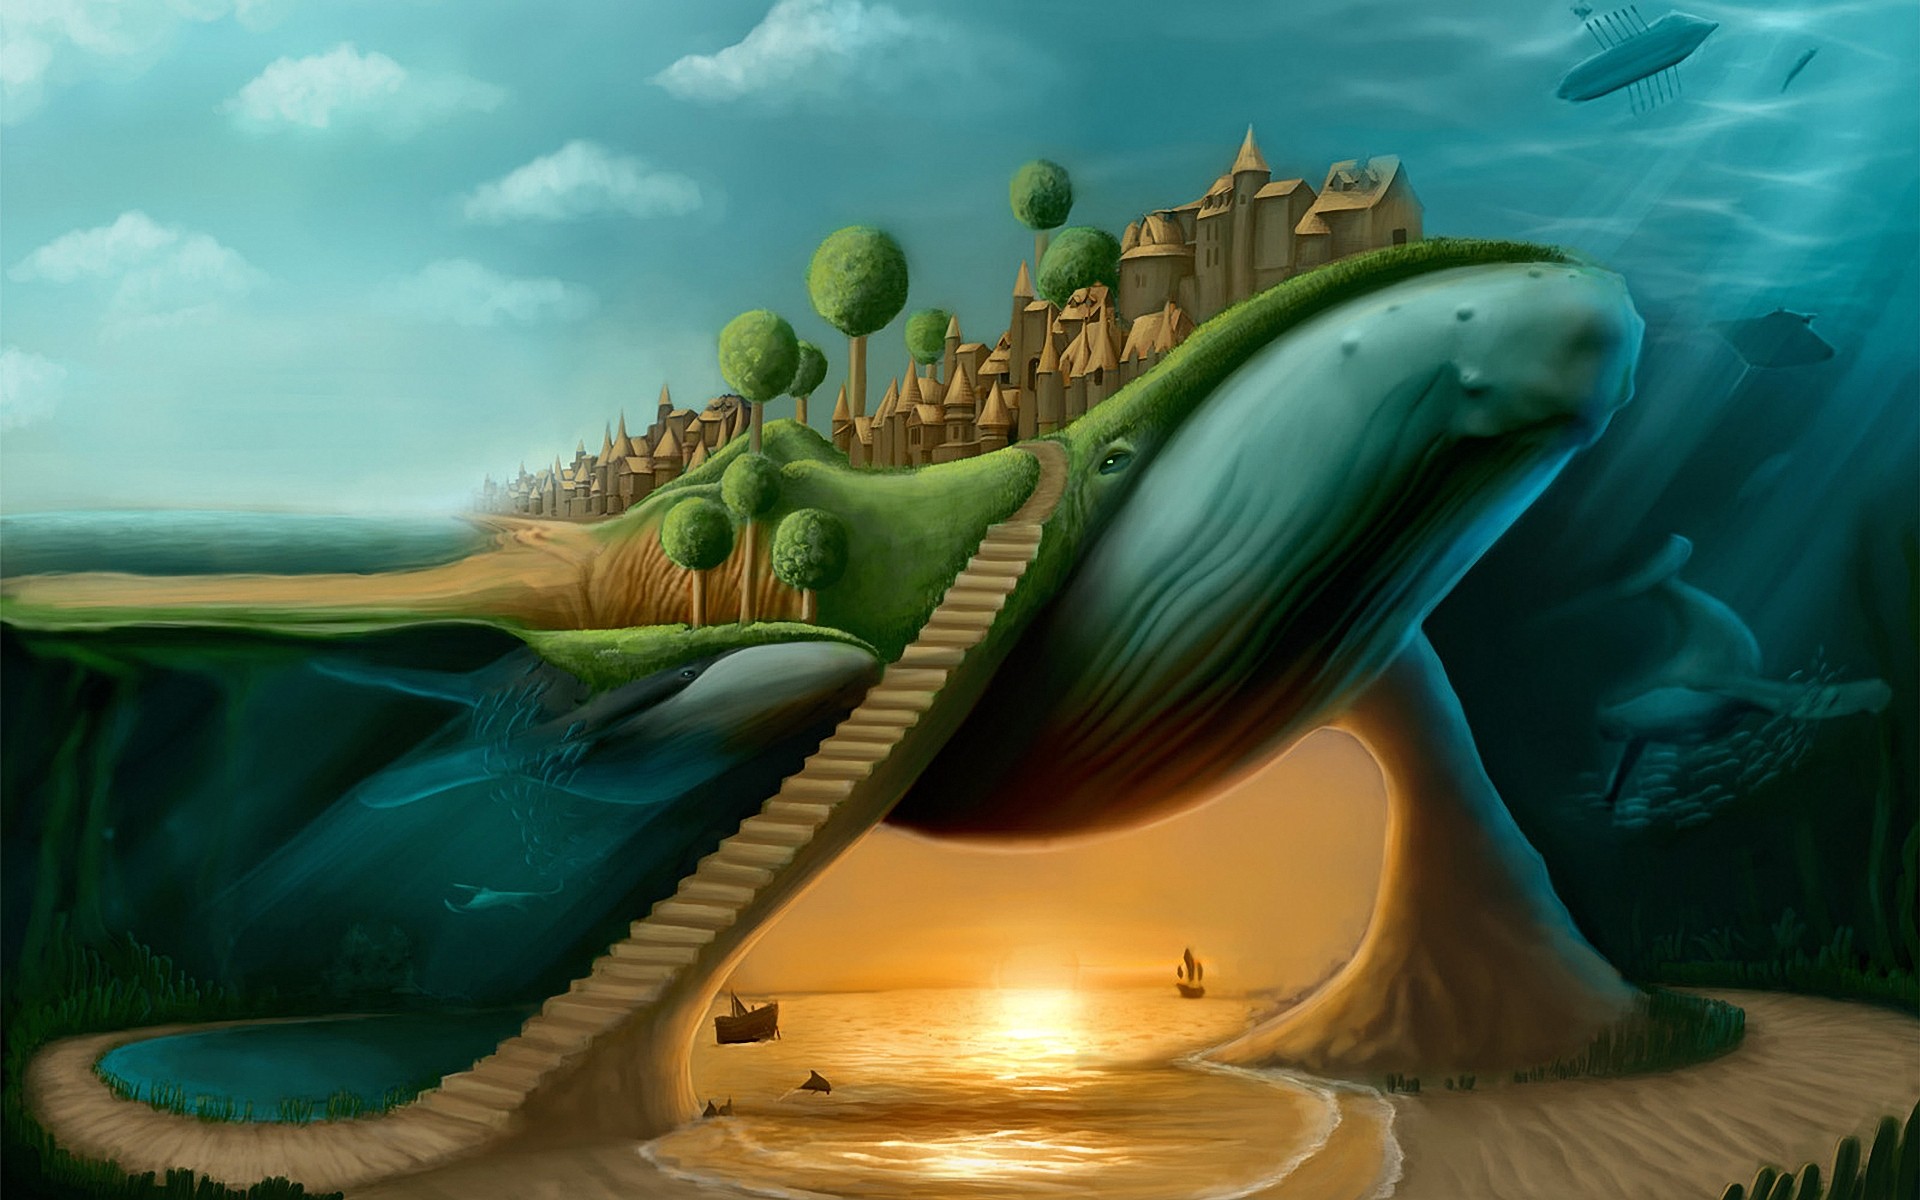 Surreal Space Wallpaper  High Definition High Resolution HD Wallpapers   High Definition High Resolution HD Wallpapers